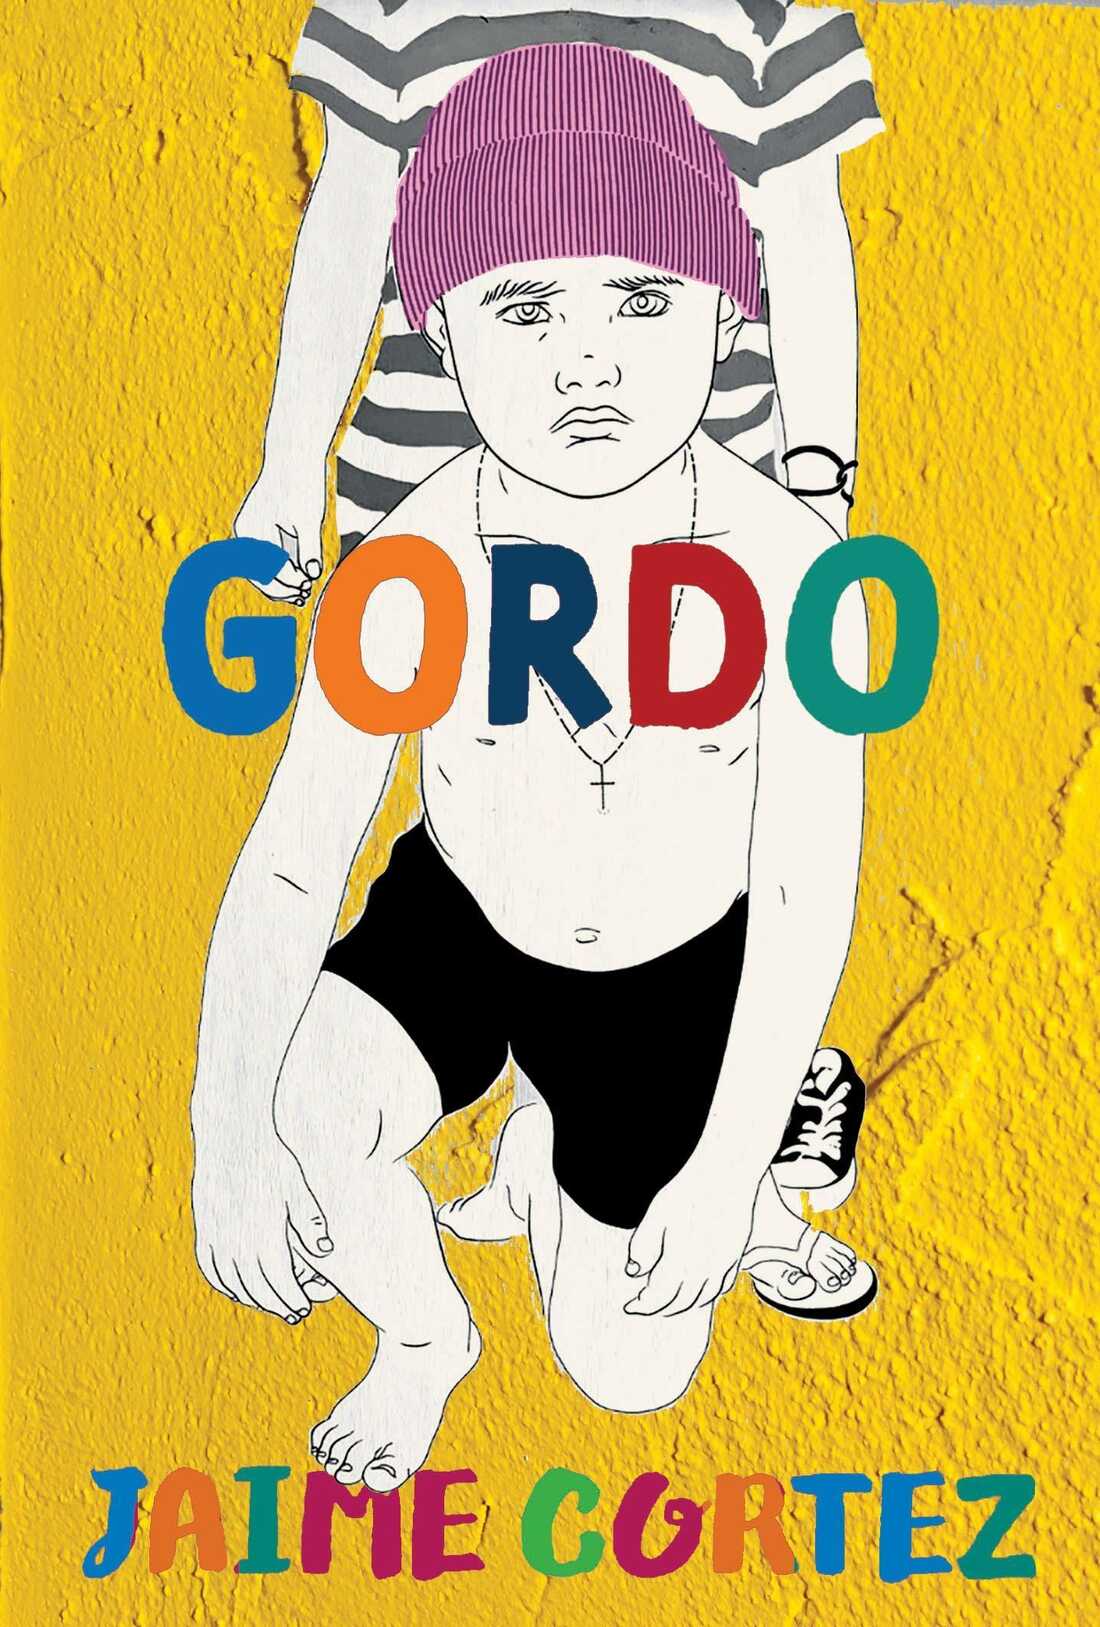 An image of a the book cover Gordo Stories by Jaime Cortez